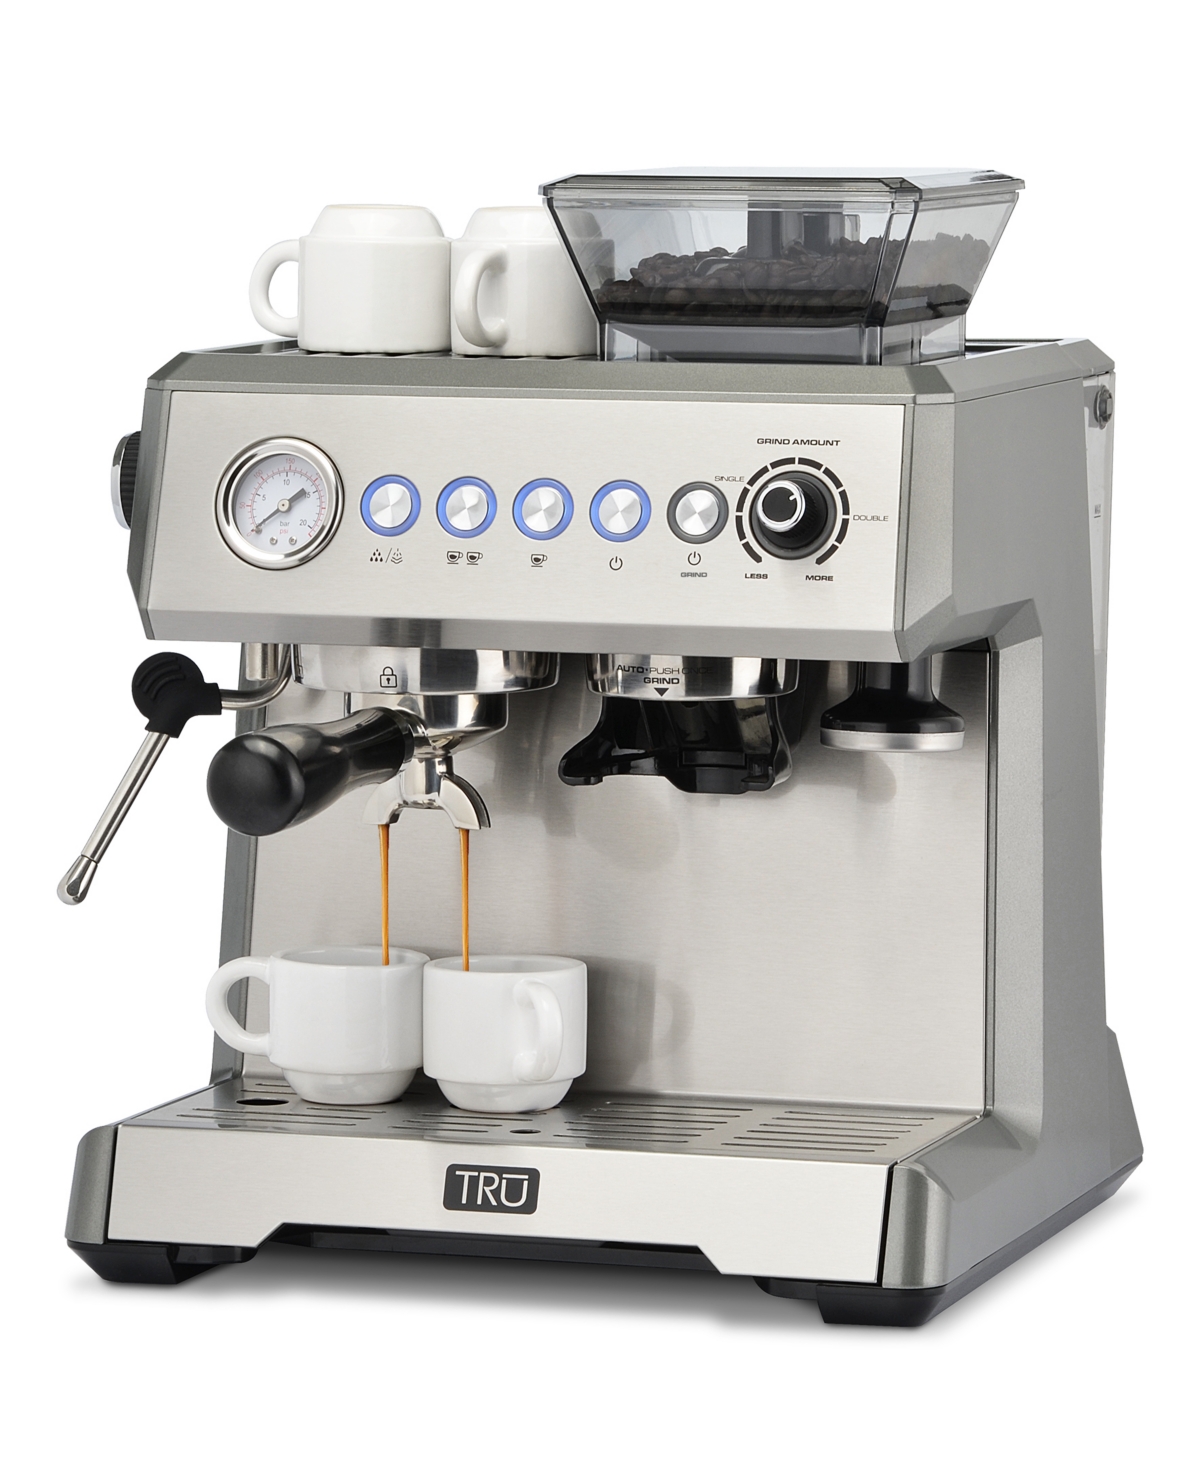 Tru 15-bar Semi-automatic All-in-one Espresso Maker With Grinder And Frother In Silver